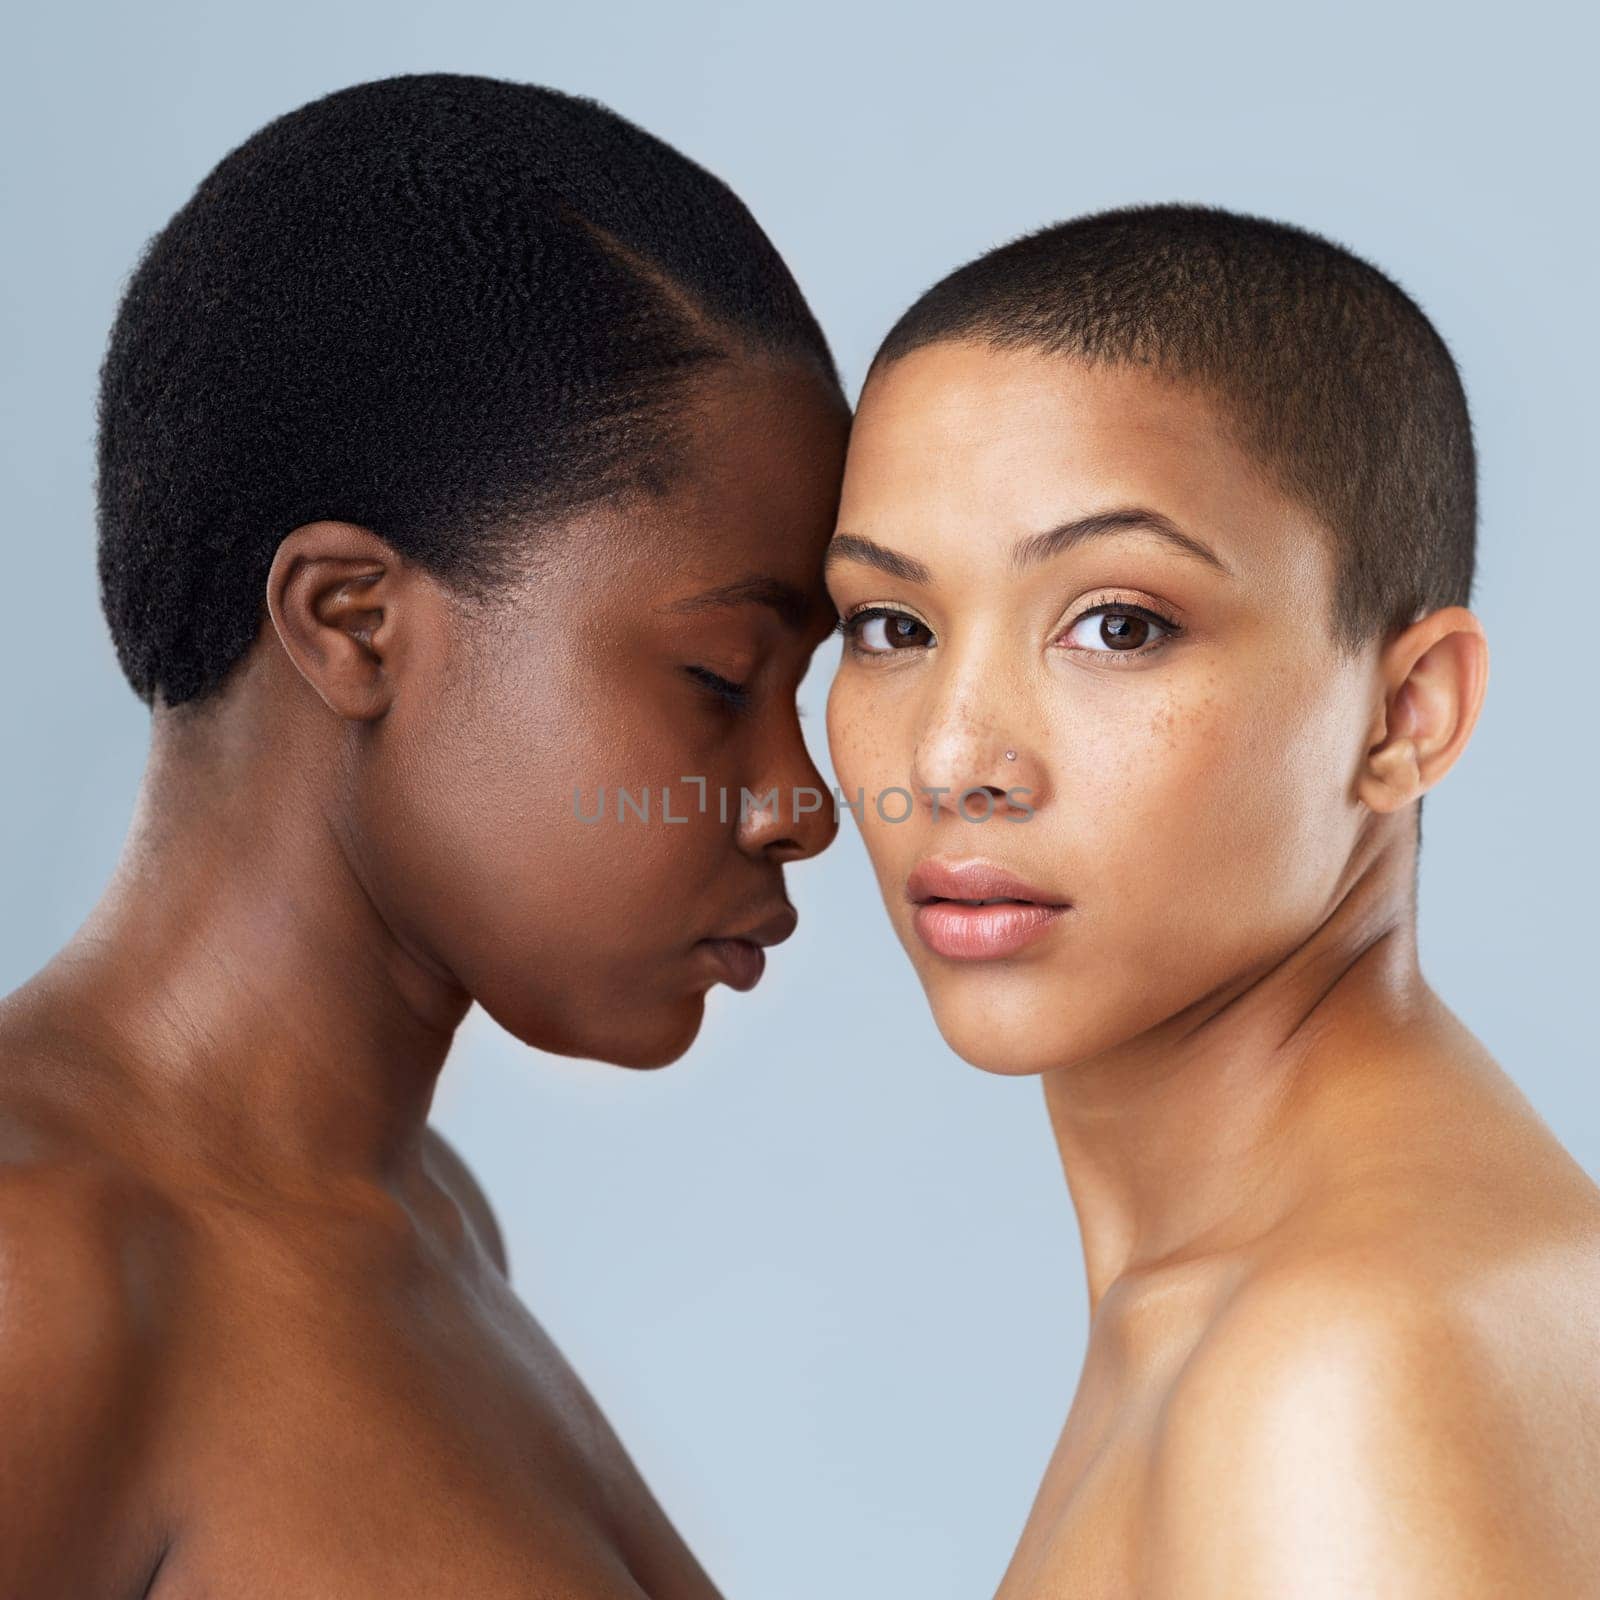 She is everything to me. Portrait of two beautiful young women standing close to each other against a grey background